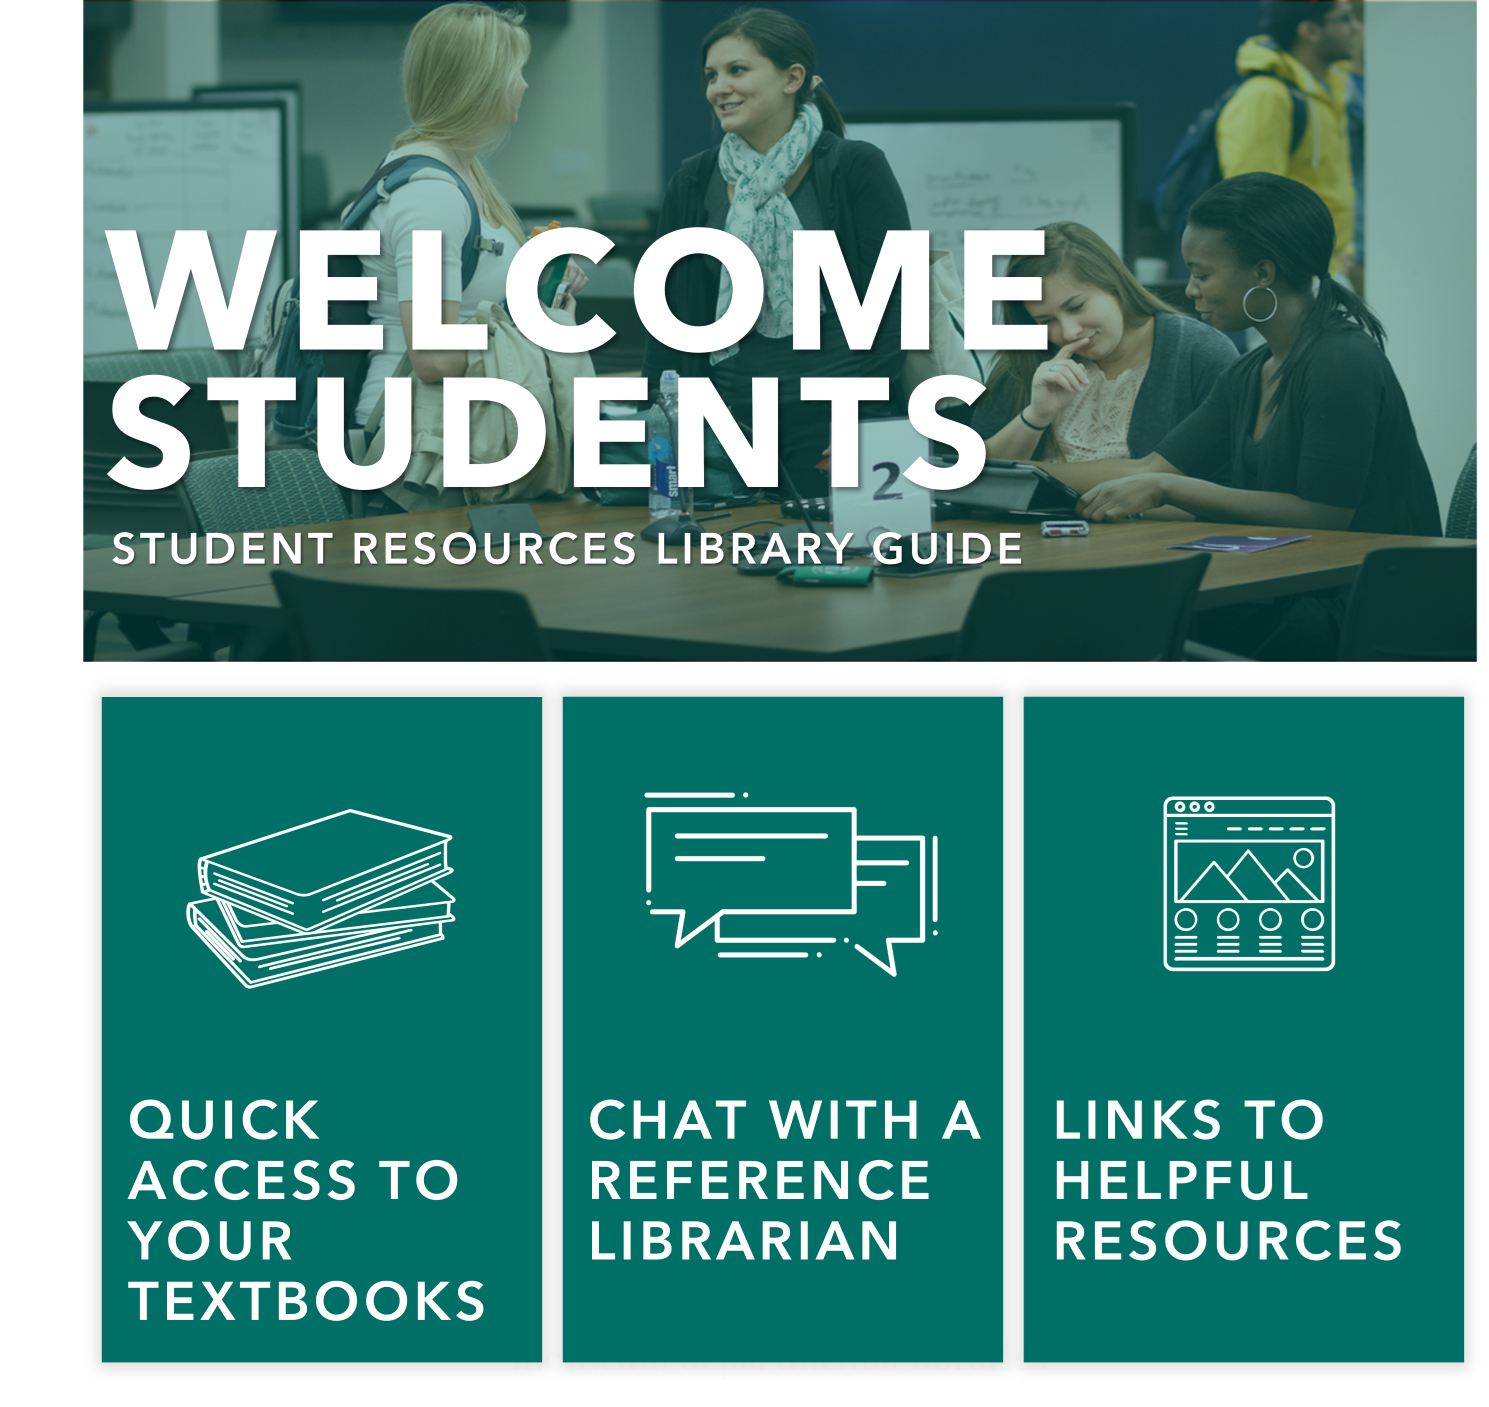 MCW Libraries Feature Resource - Resources for Students